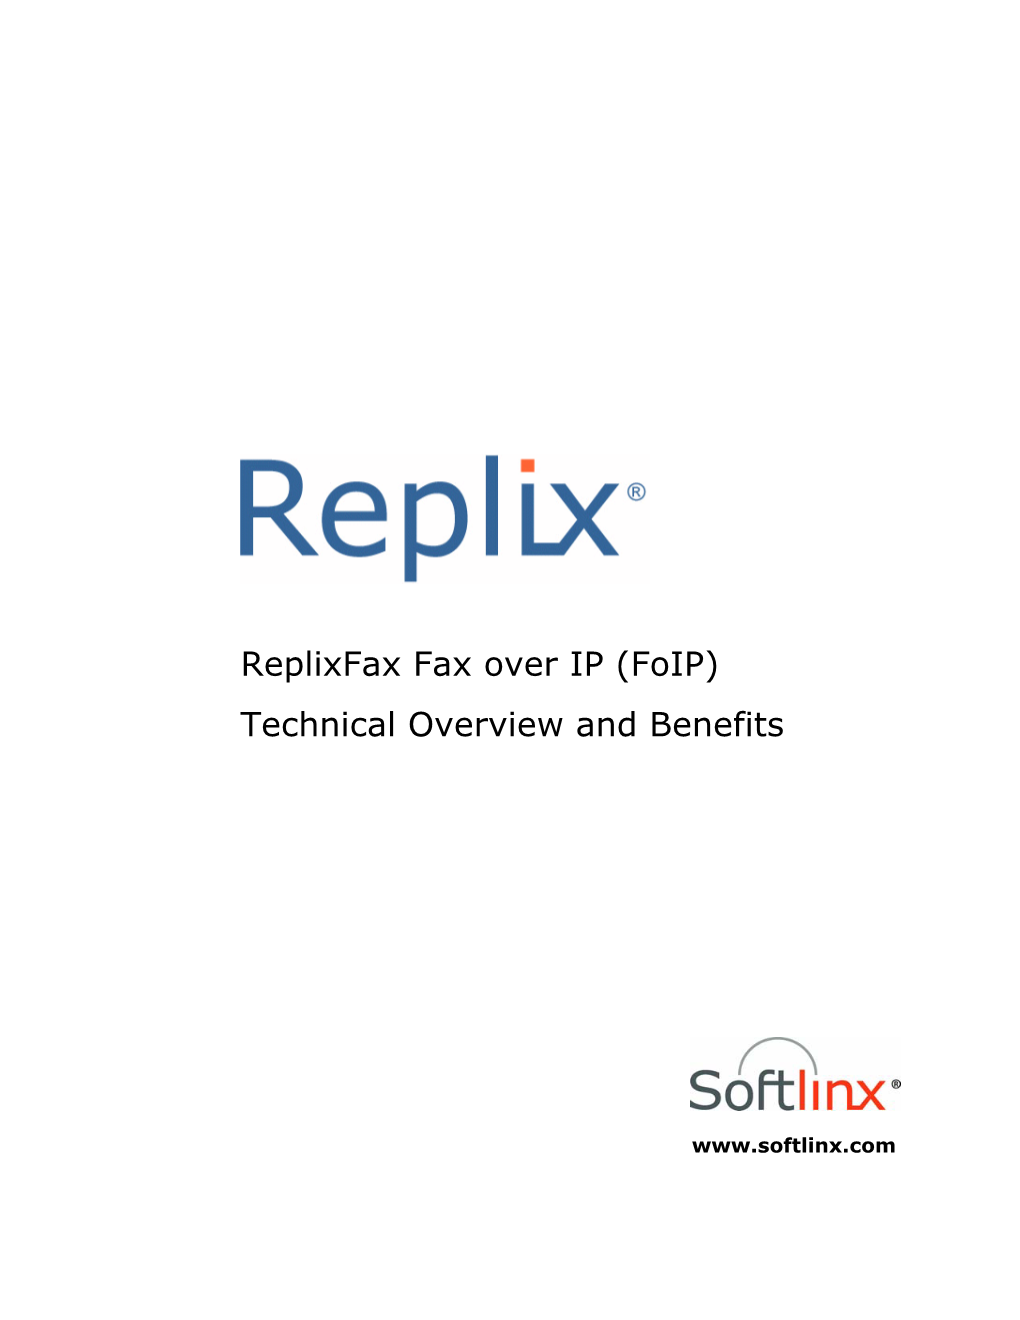 Replixfax Fax Over IP (Foip) Technical Overview and Benefits